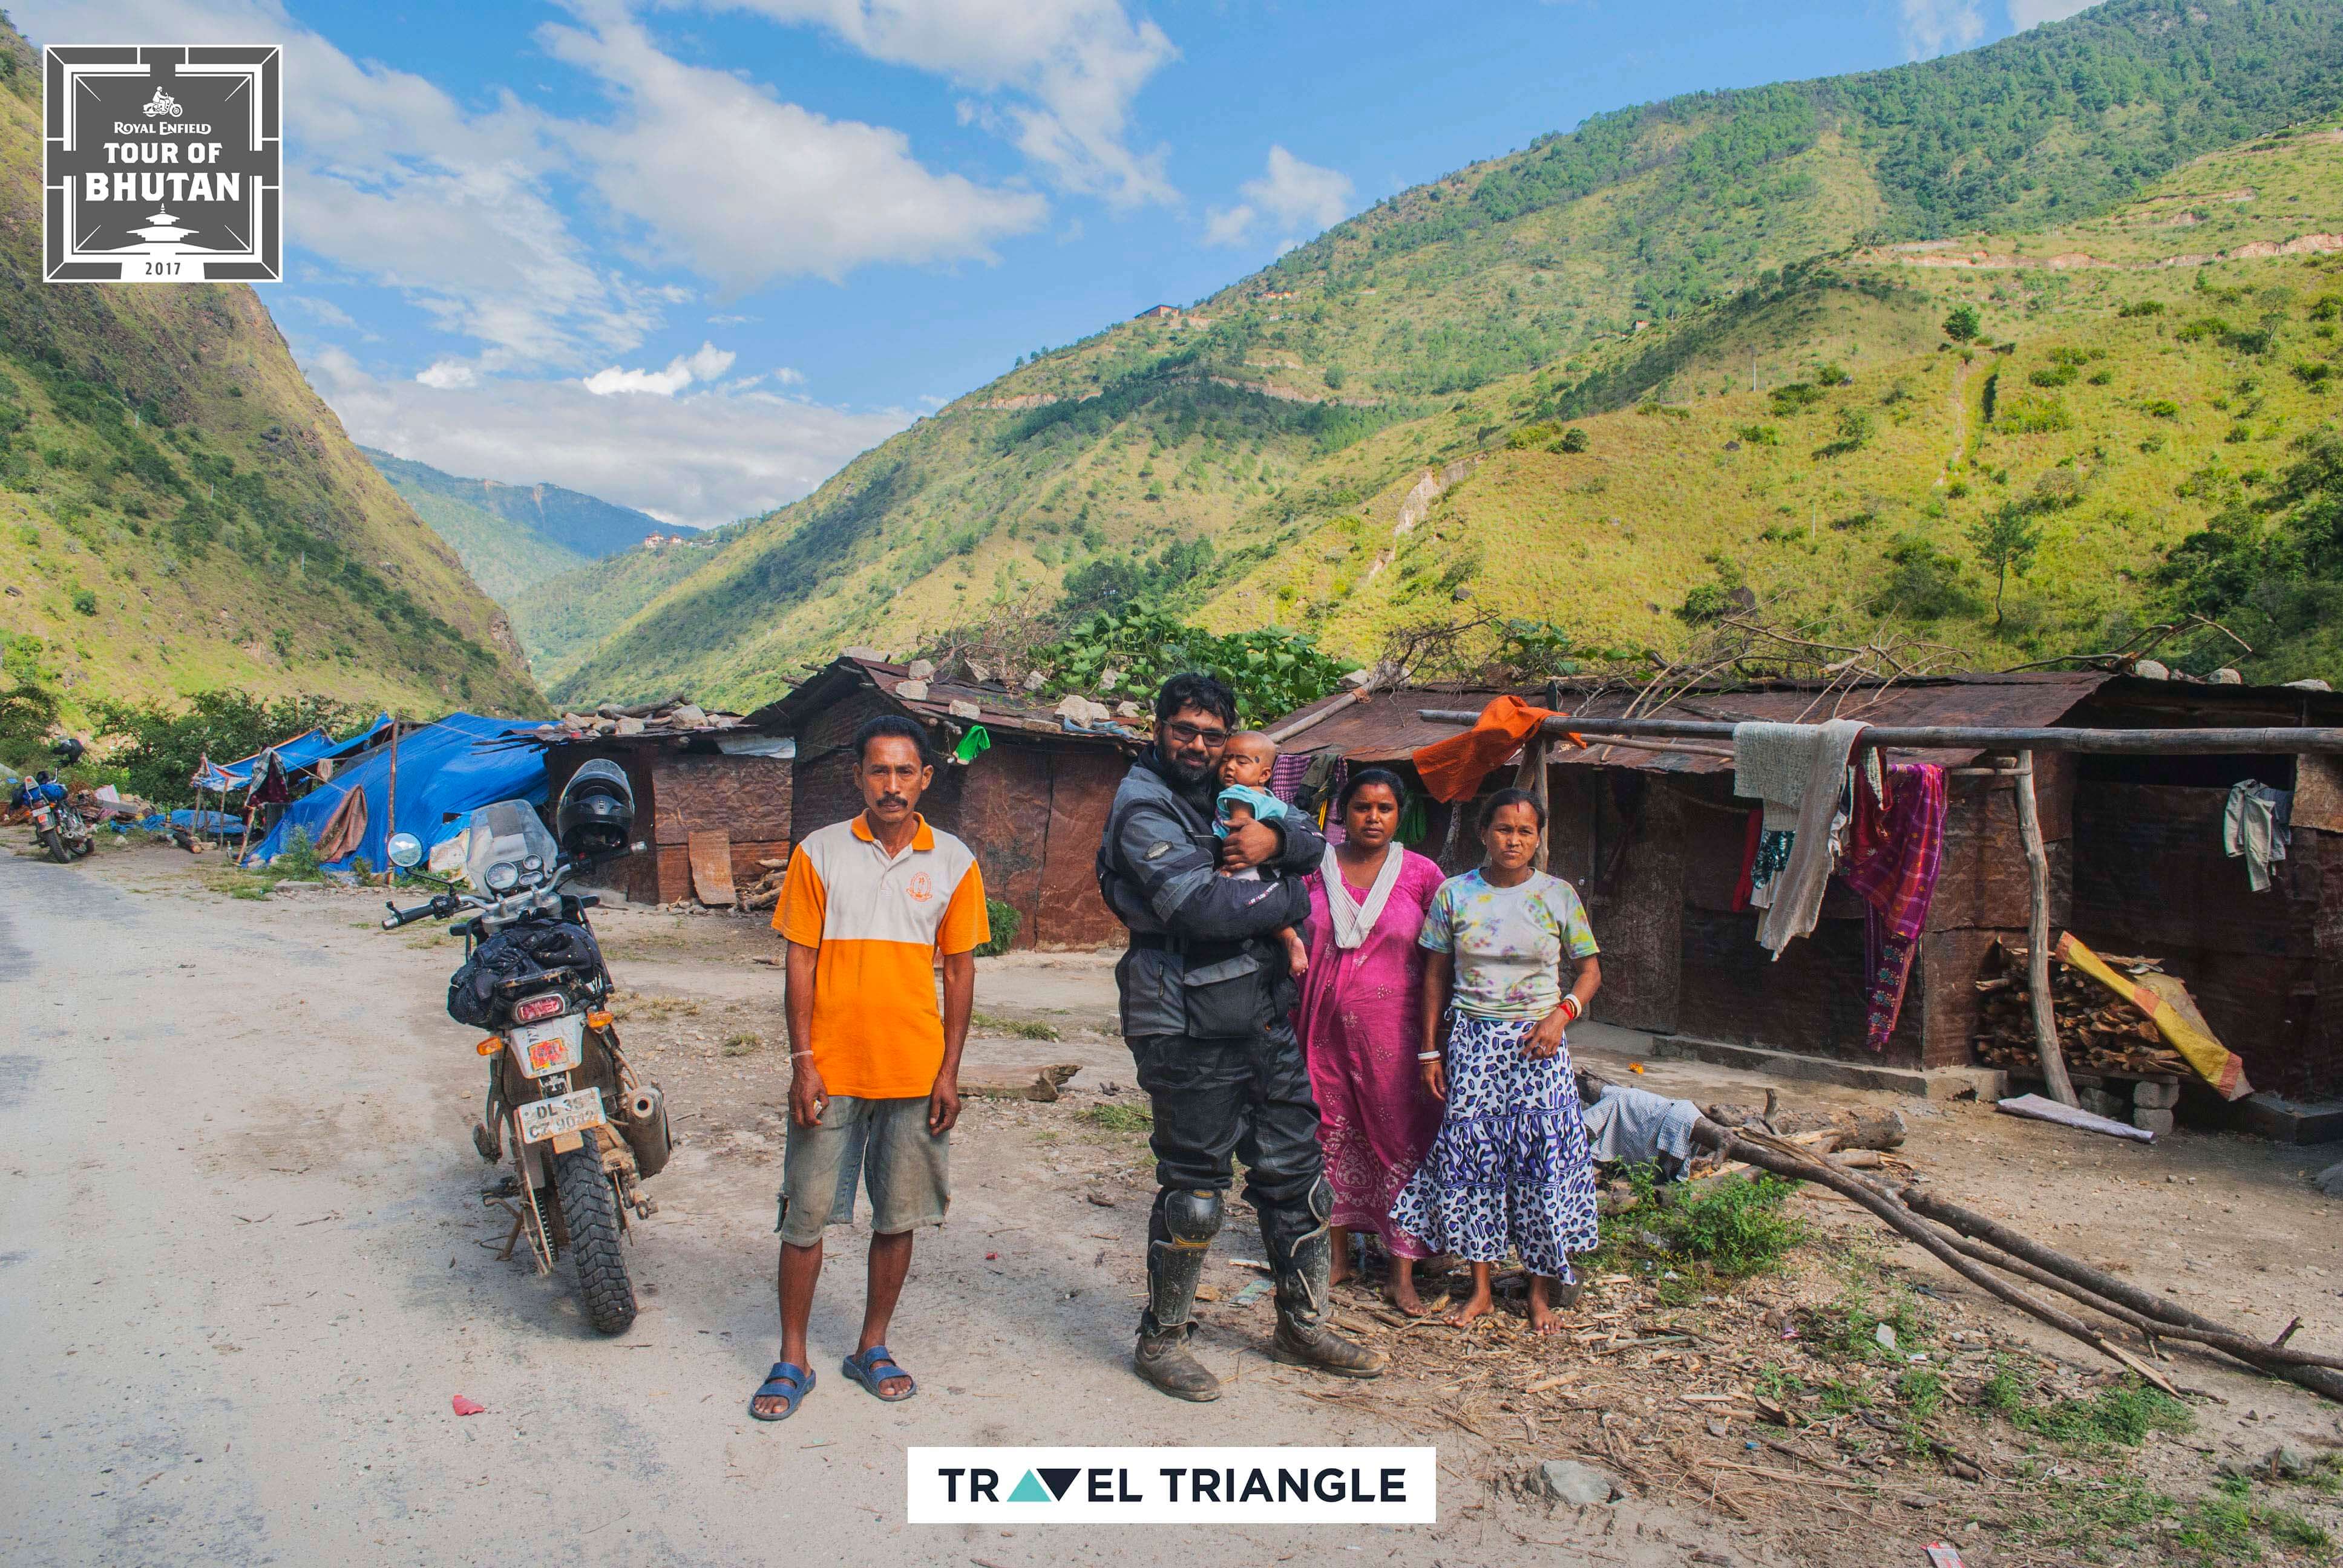 Mongar to Trashigang: riders meeting a family of friendly bhutanese people